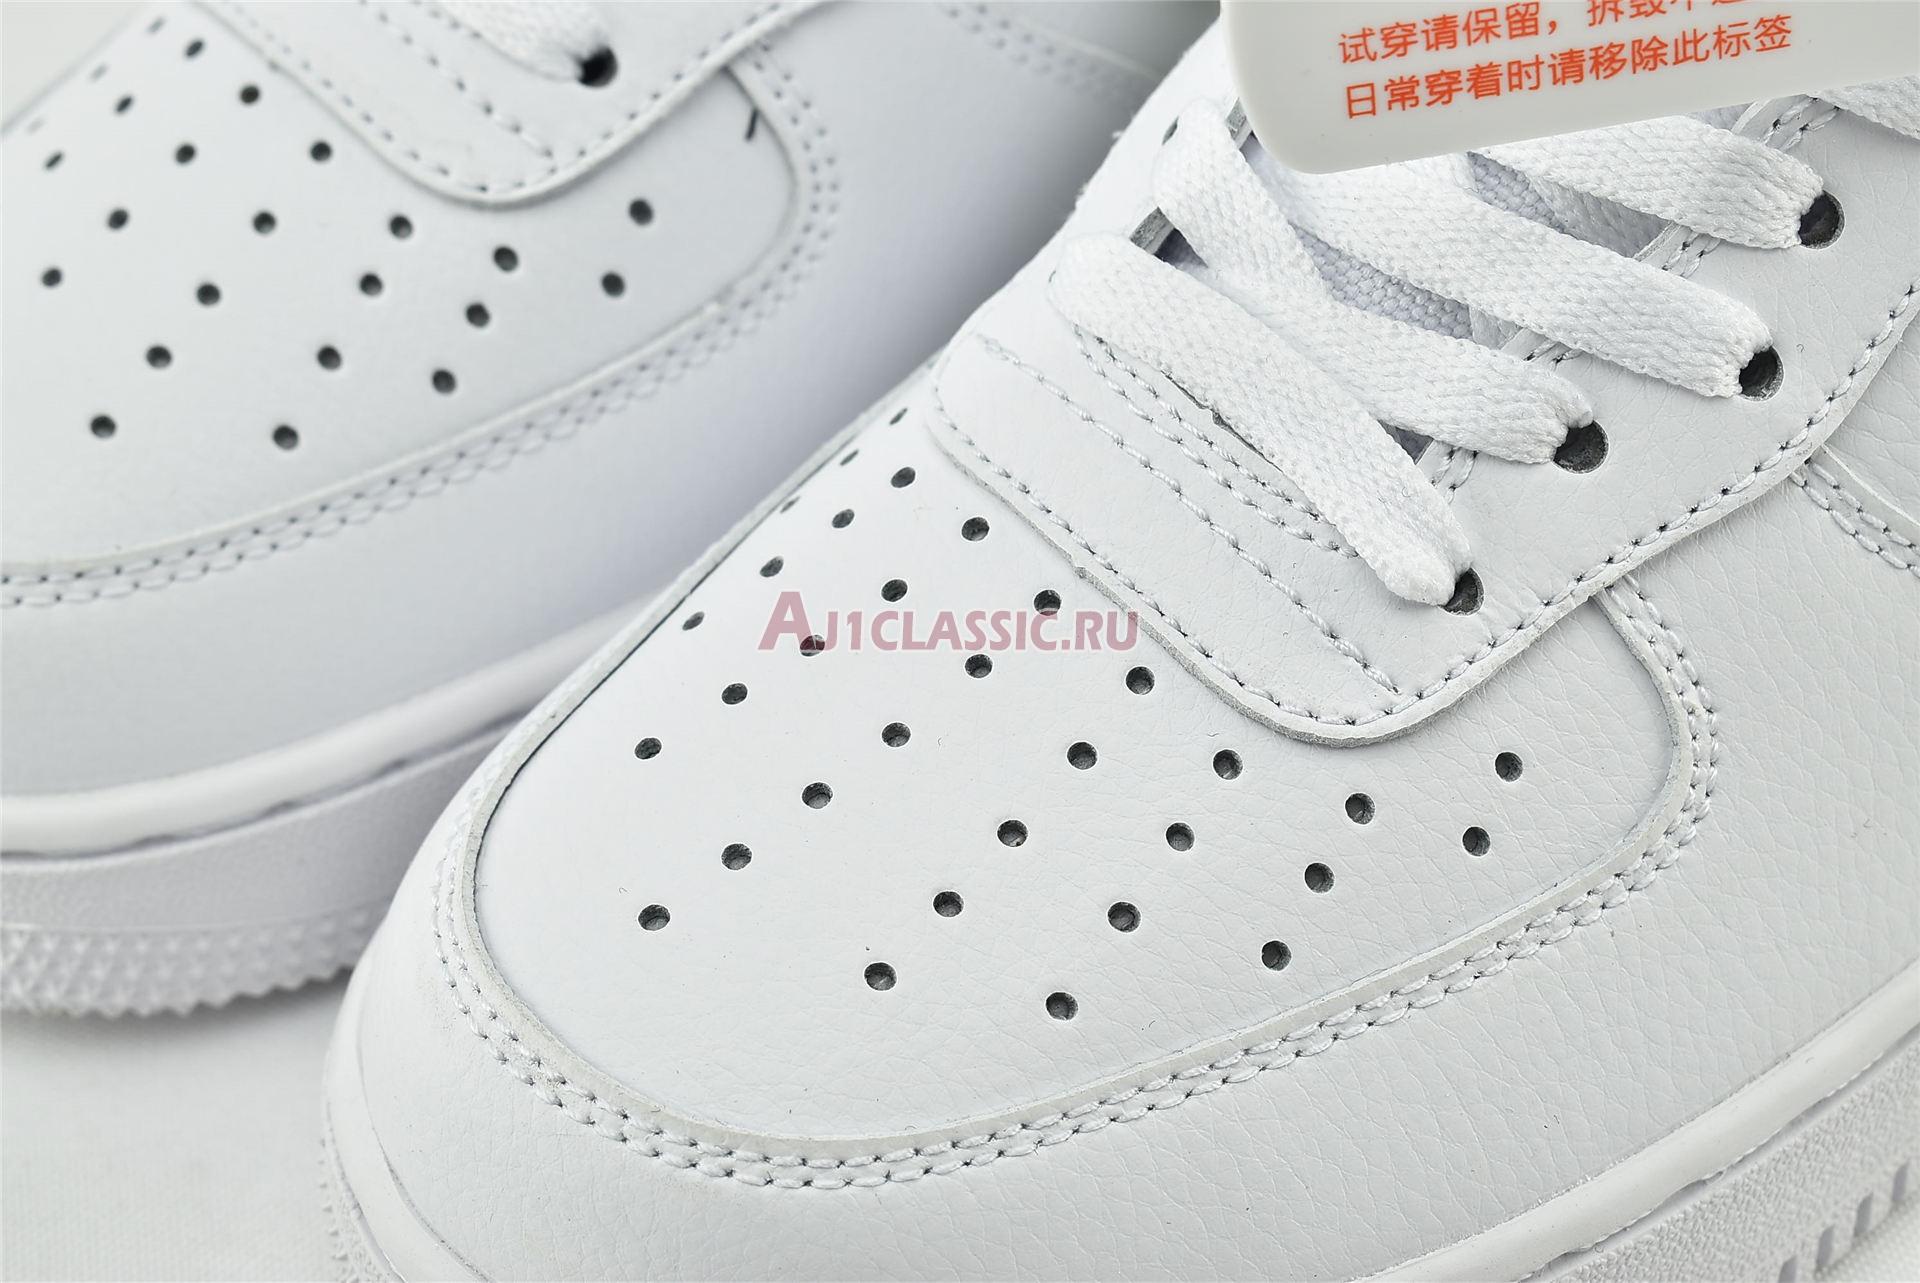 Nike Air Force 1 LV8 1 "Worldwide Pack - White Barely Volt" CN8536-100